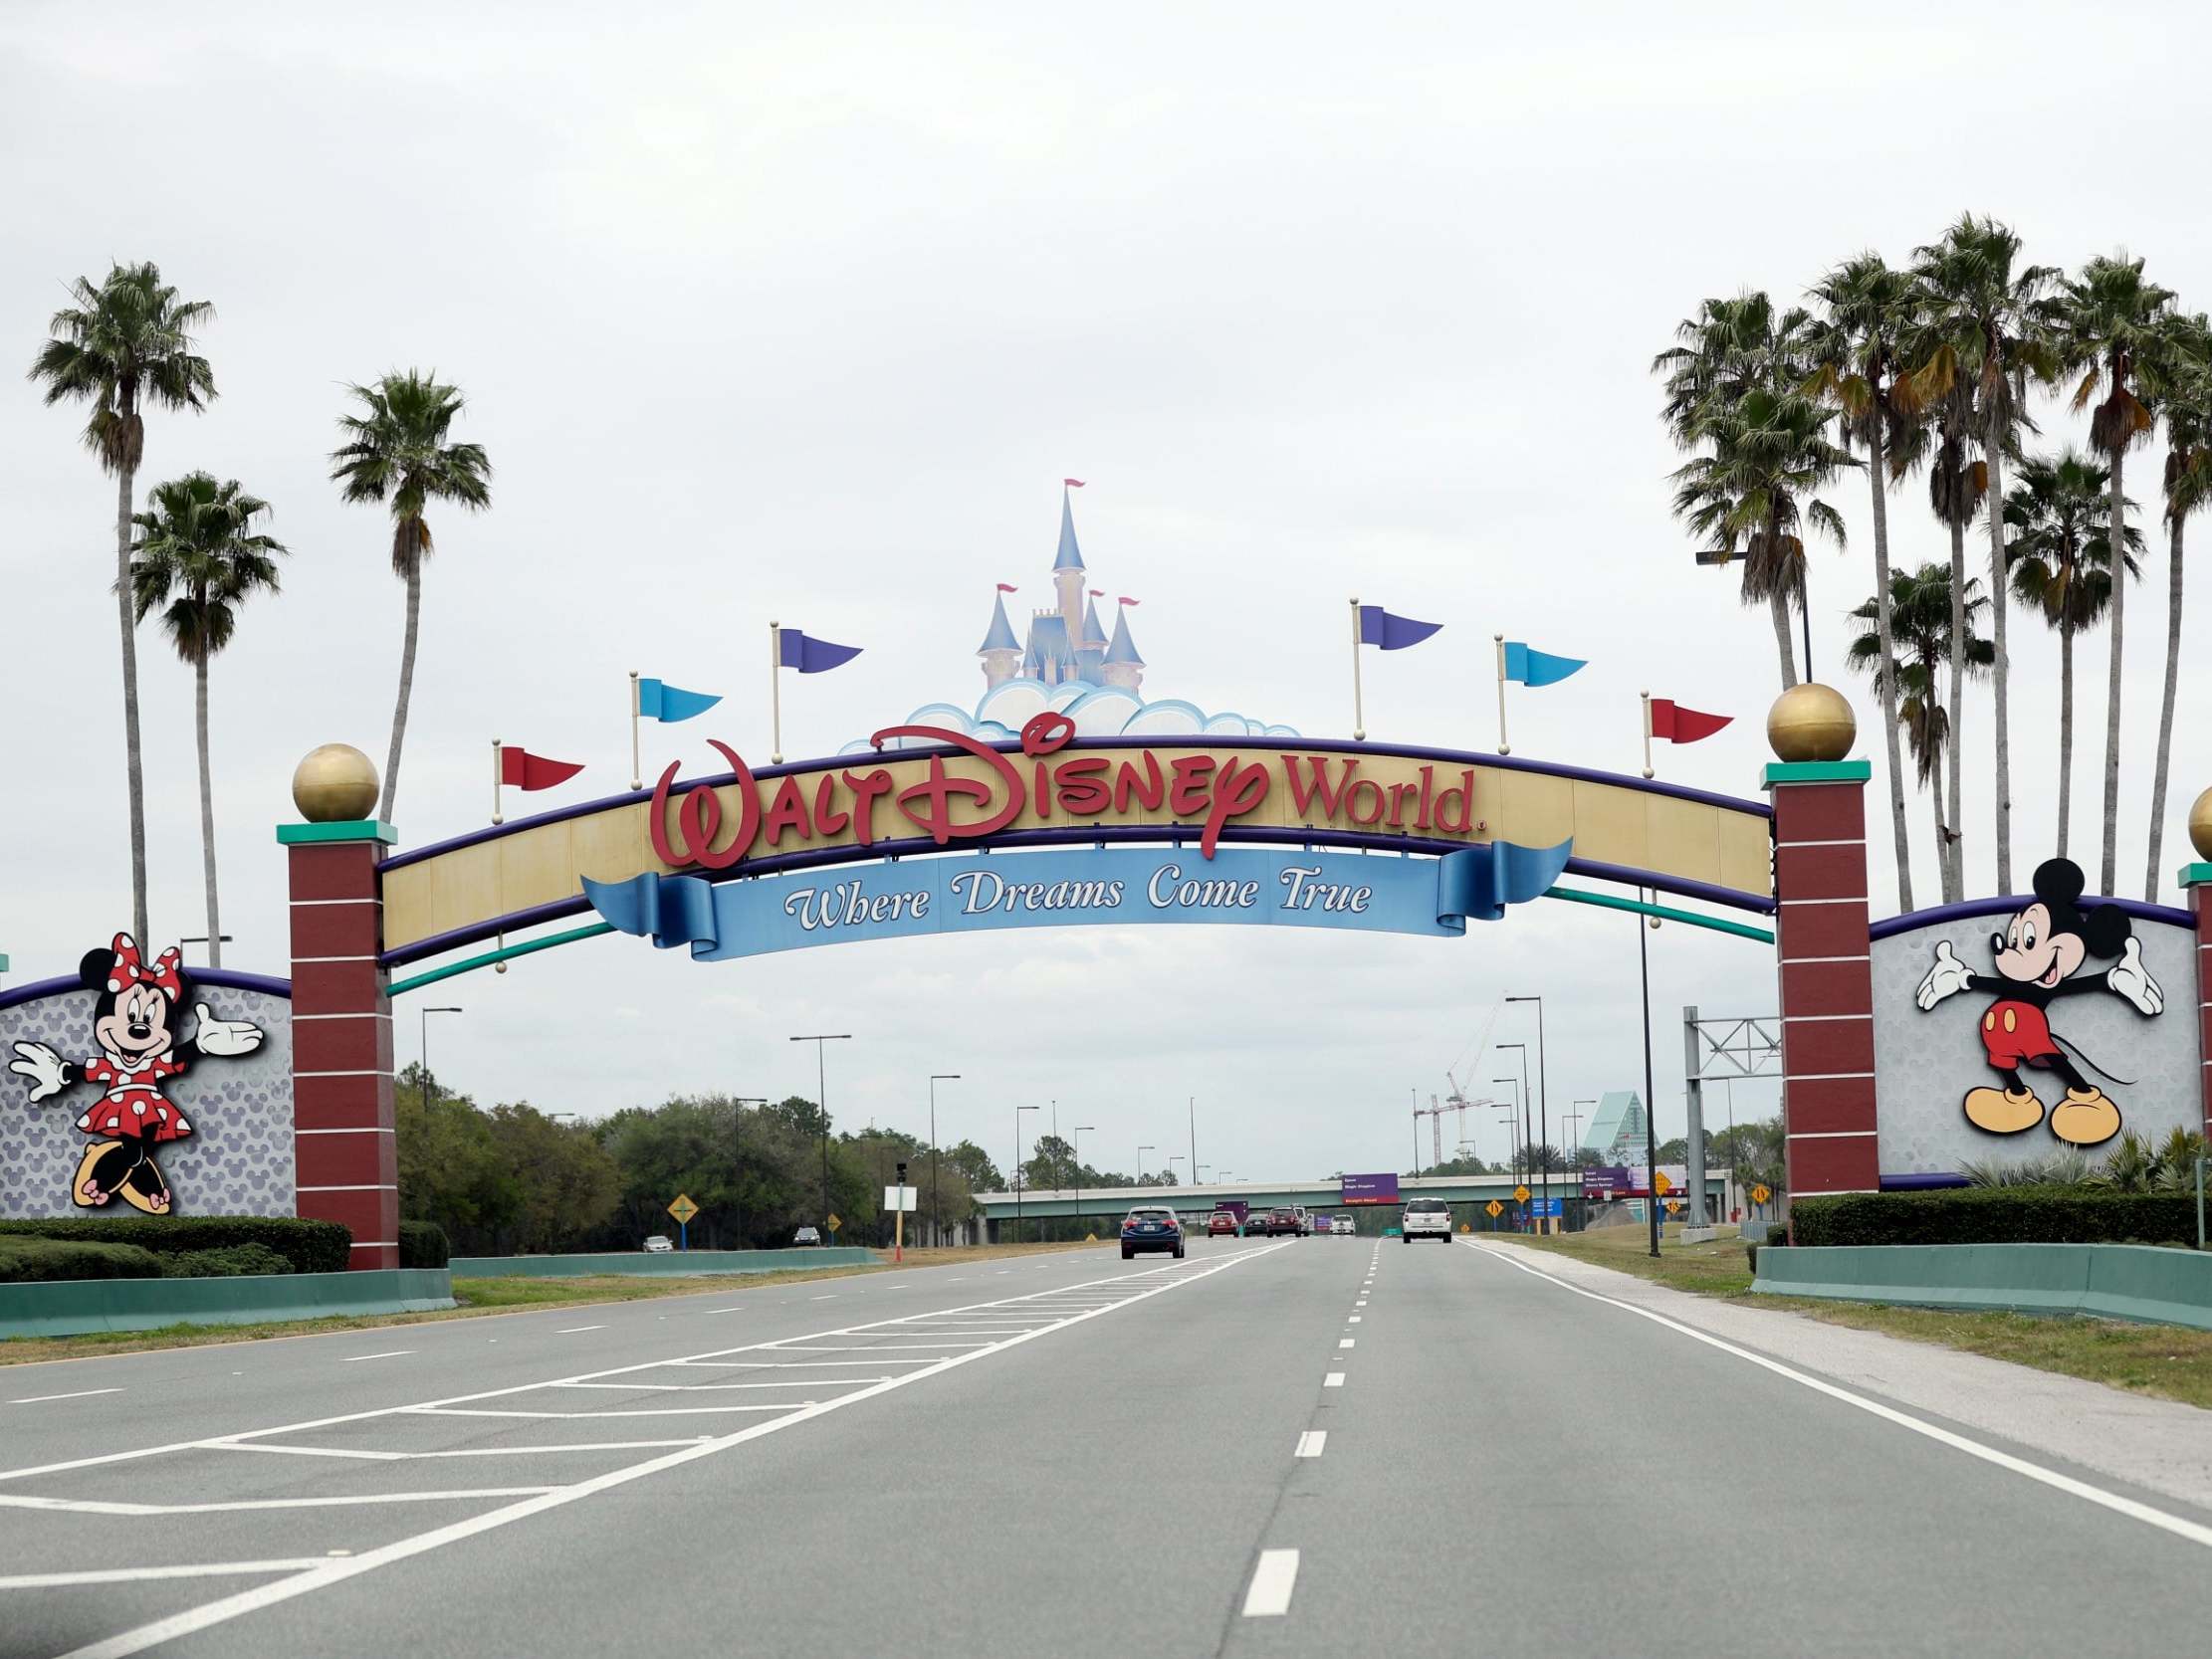 Disney World Florida closed on 16th March, days after a 34-year-old man died from coronavirus after visiting the theme park